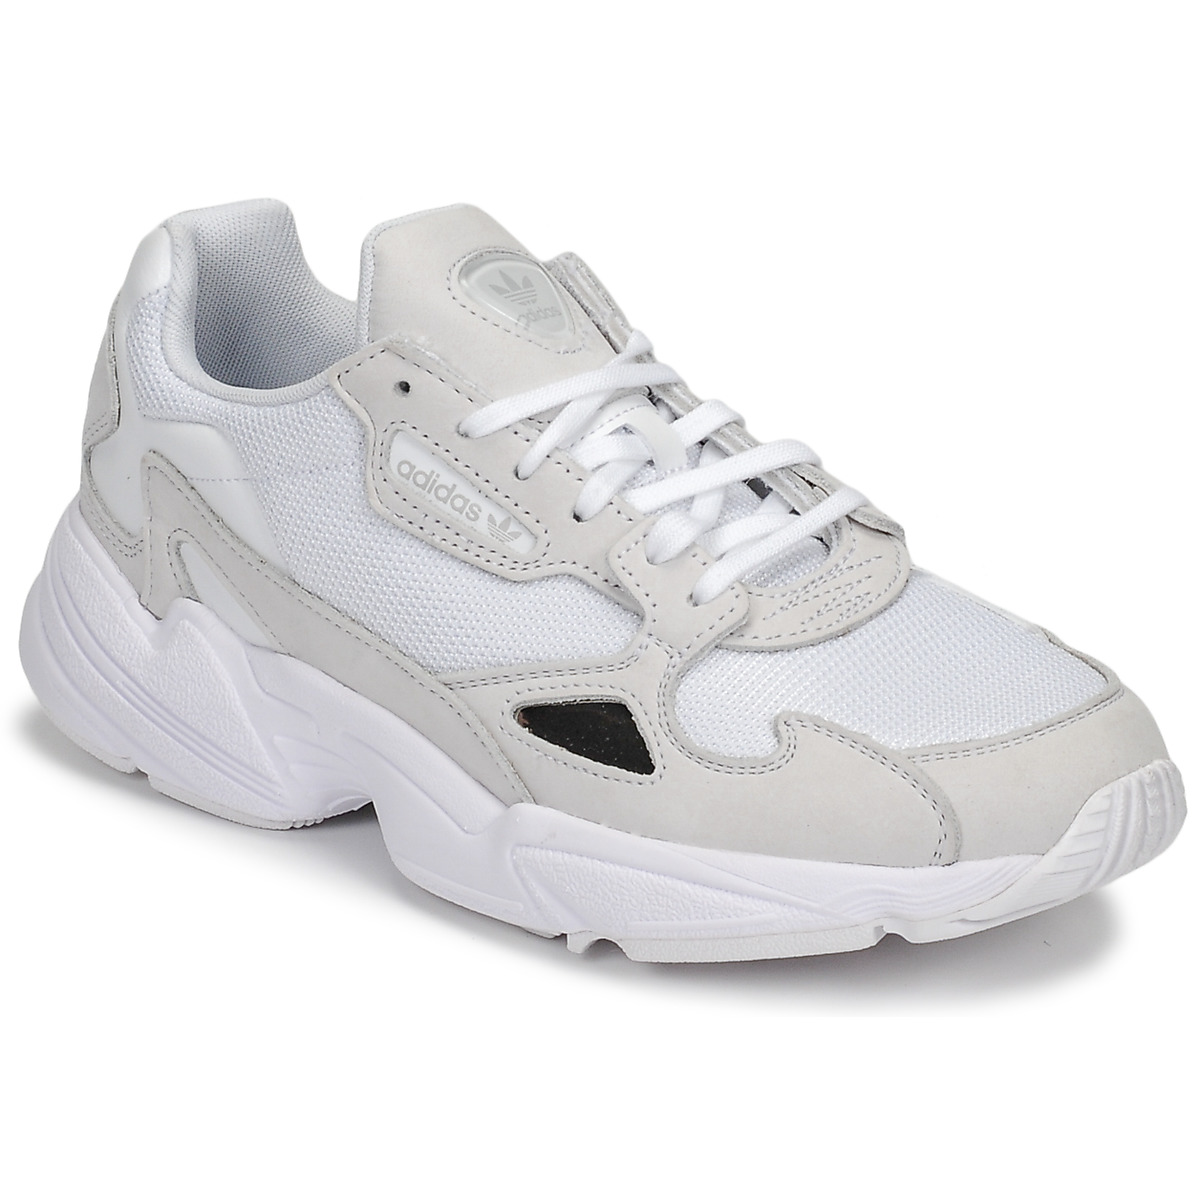 adidas falcon w sneakers basses femme